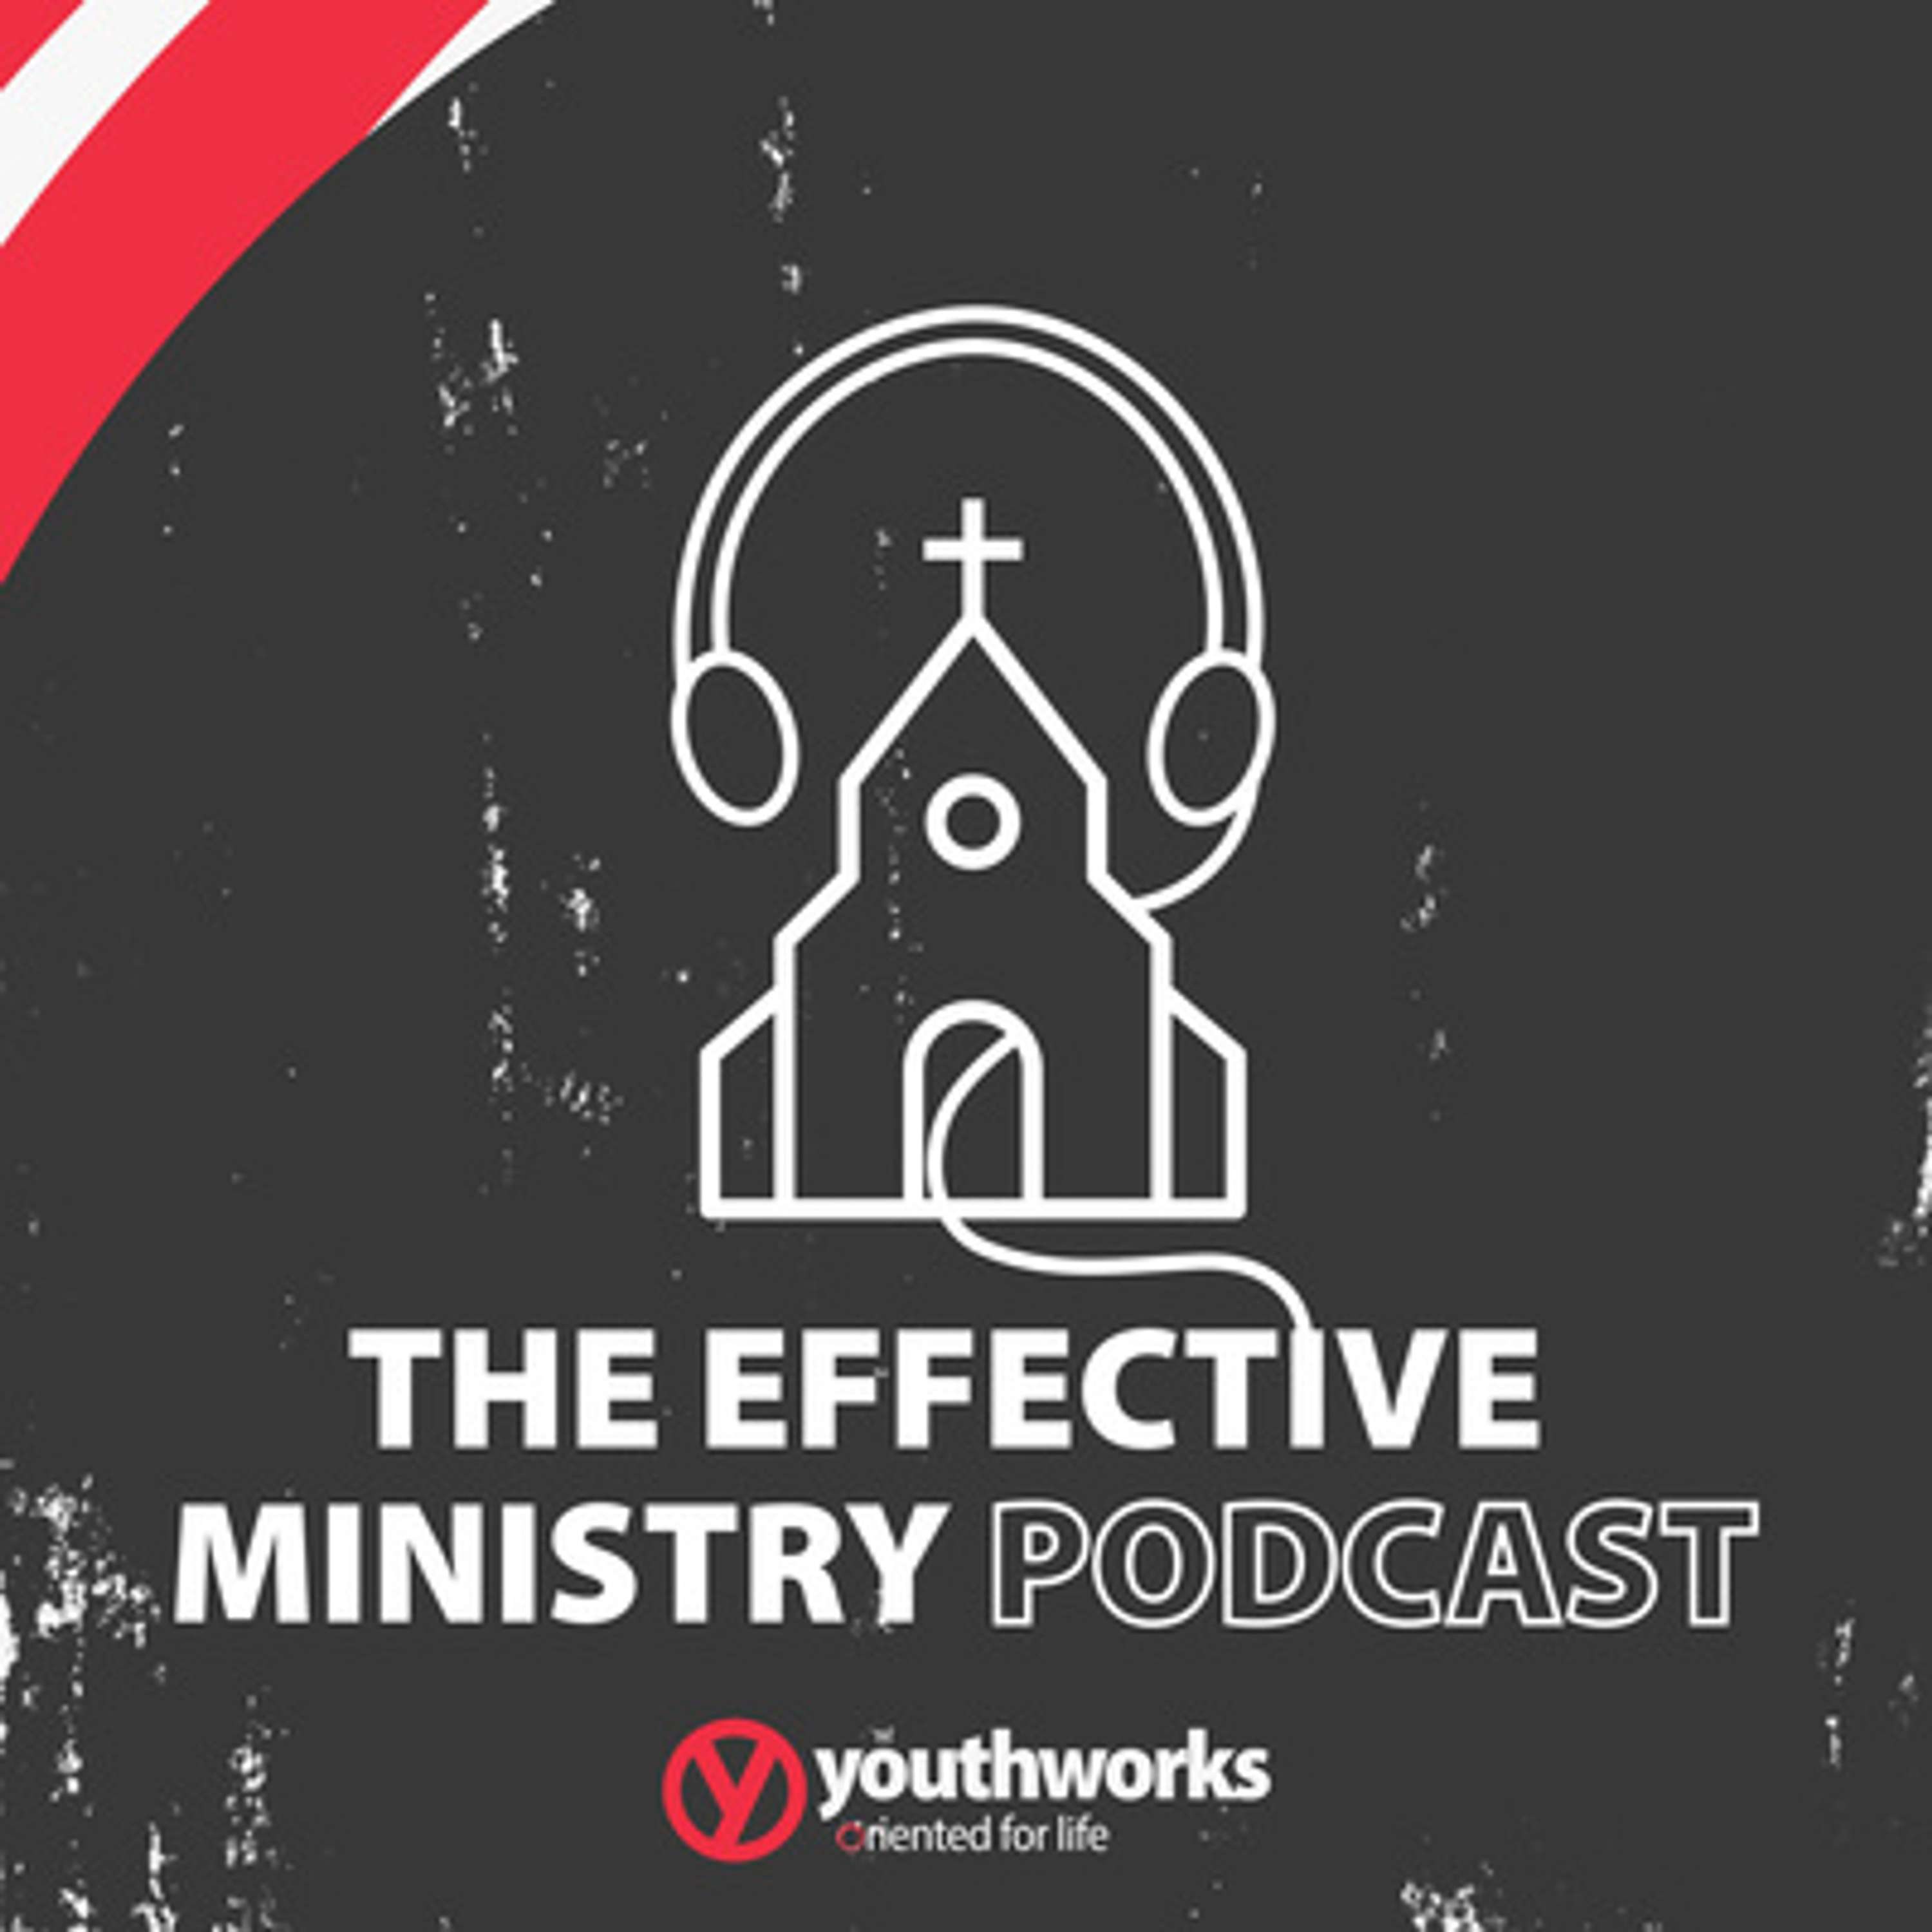 007 - Children's, Family and Intergenerational Ministry with Tim Beilharz and Dan Wu